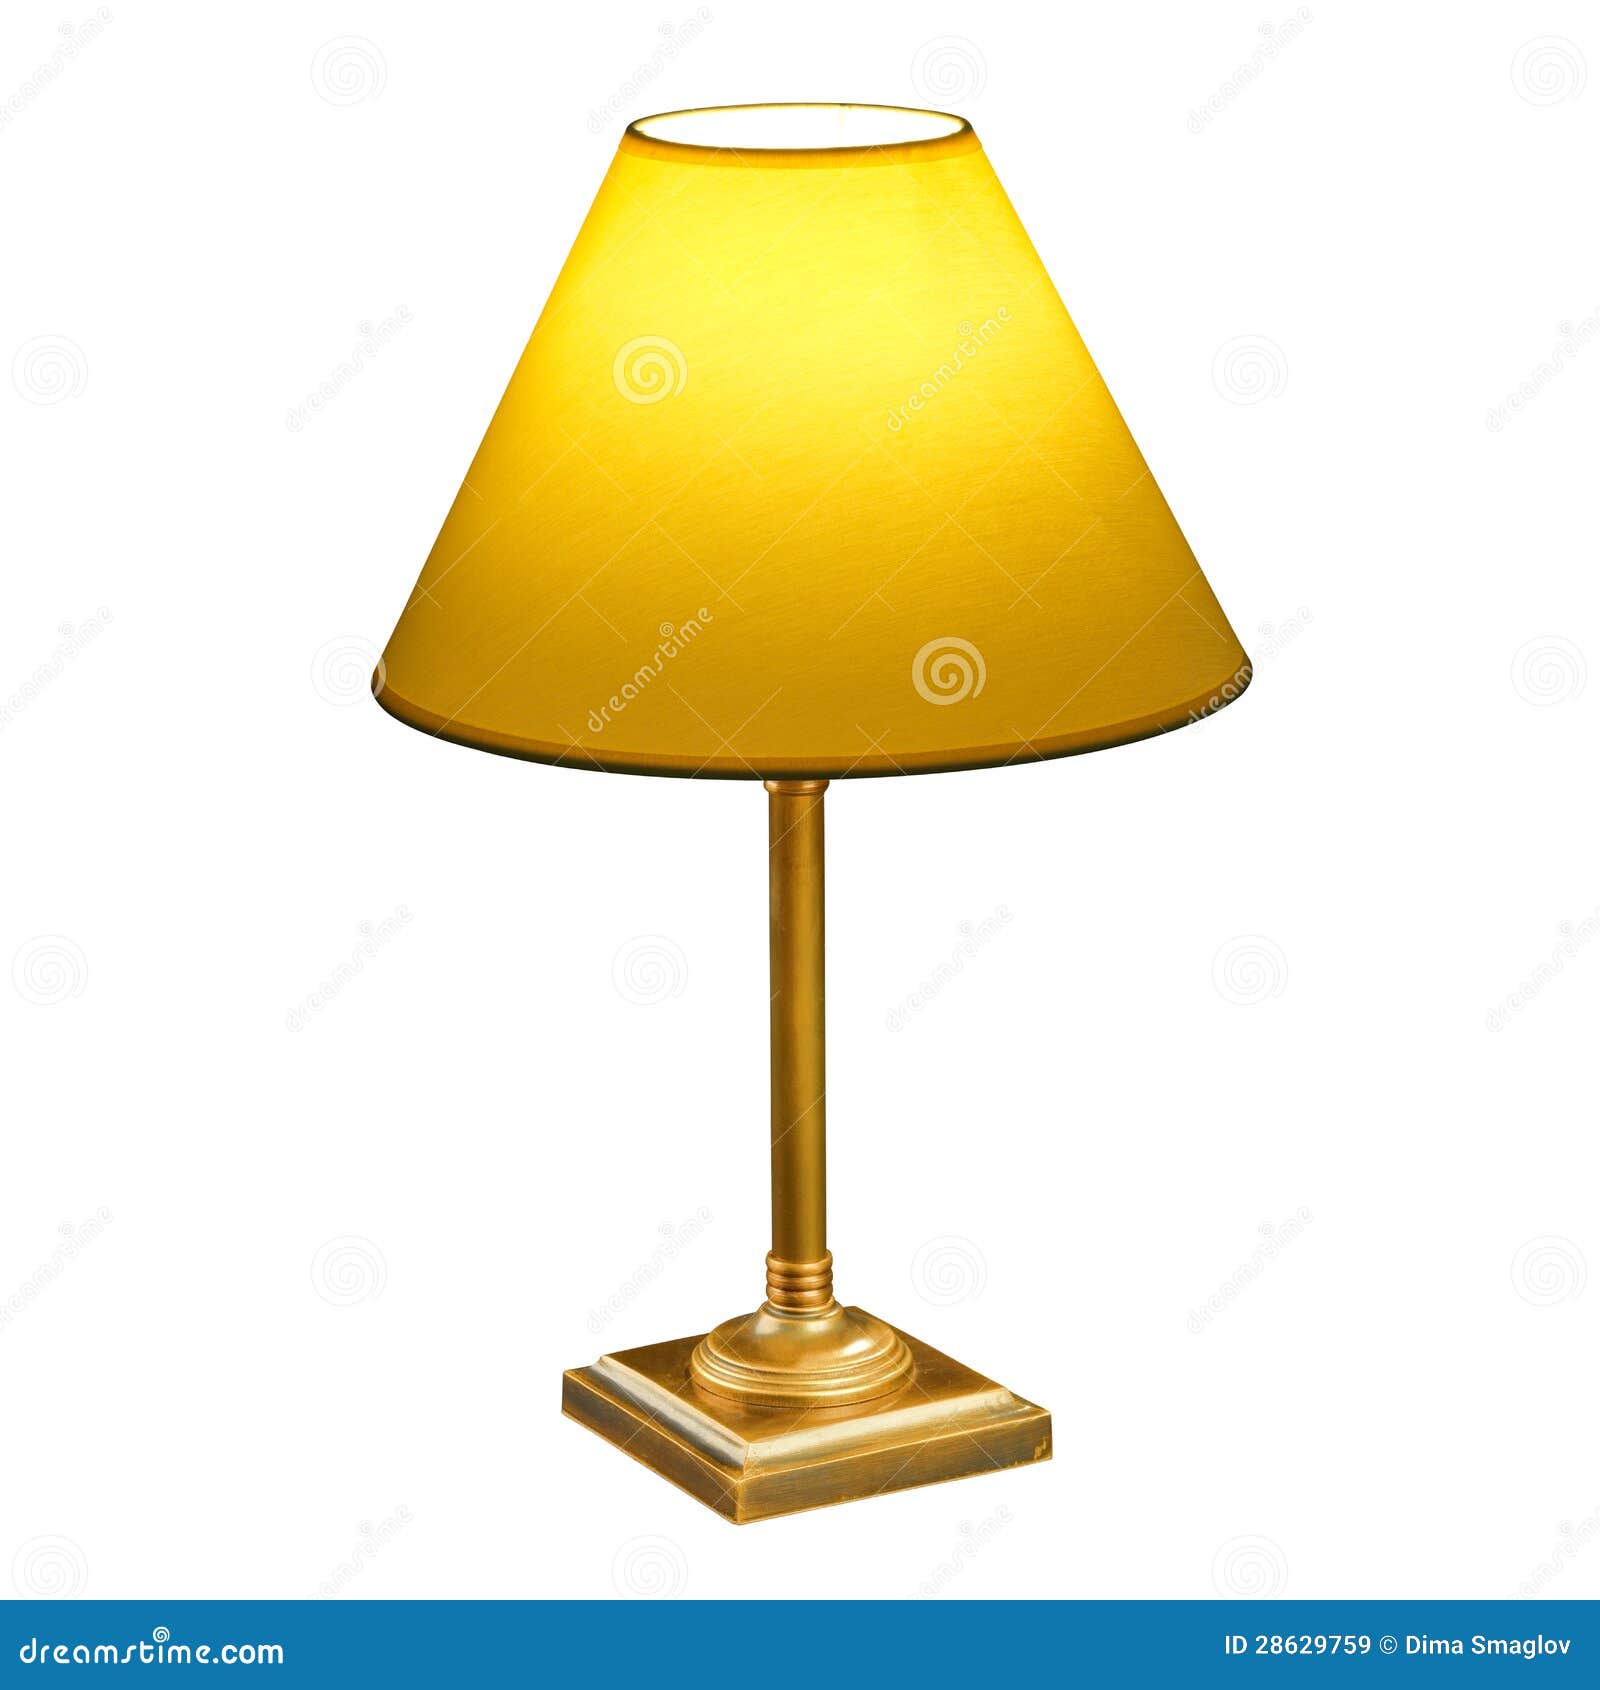 Vintage Lamp Isolated on White Stock Image - Image of magnificent ...